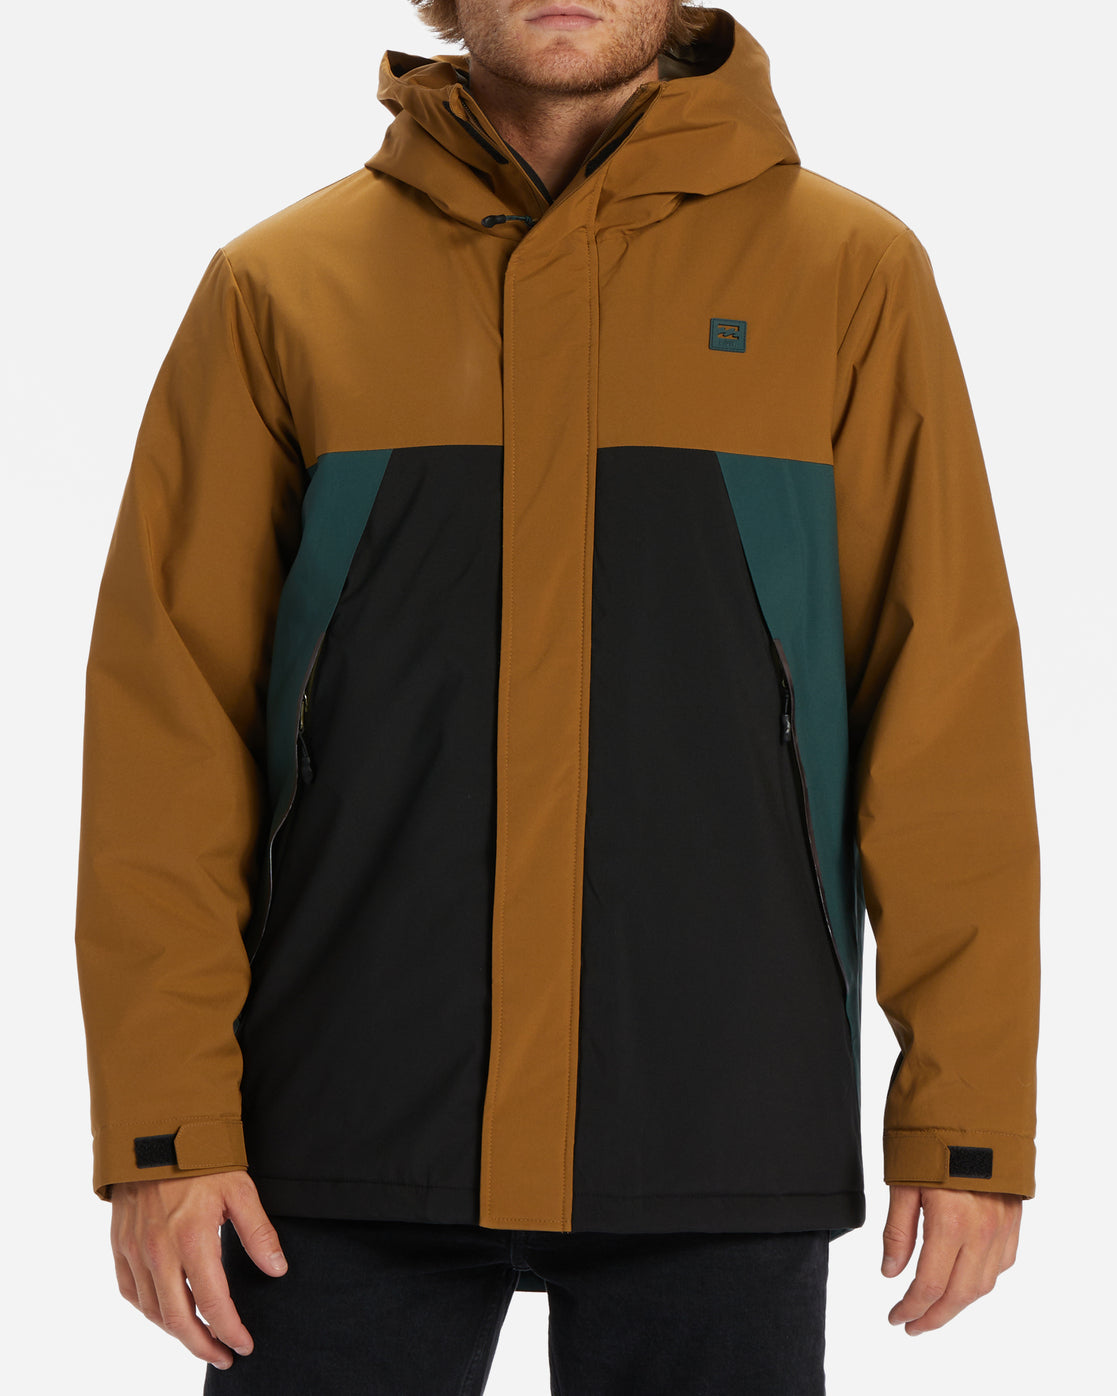 Expedition Technical Winter Jacket - Otter